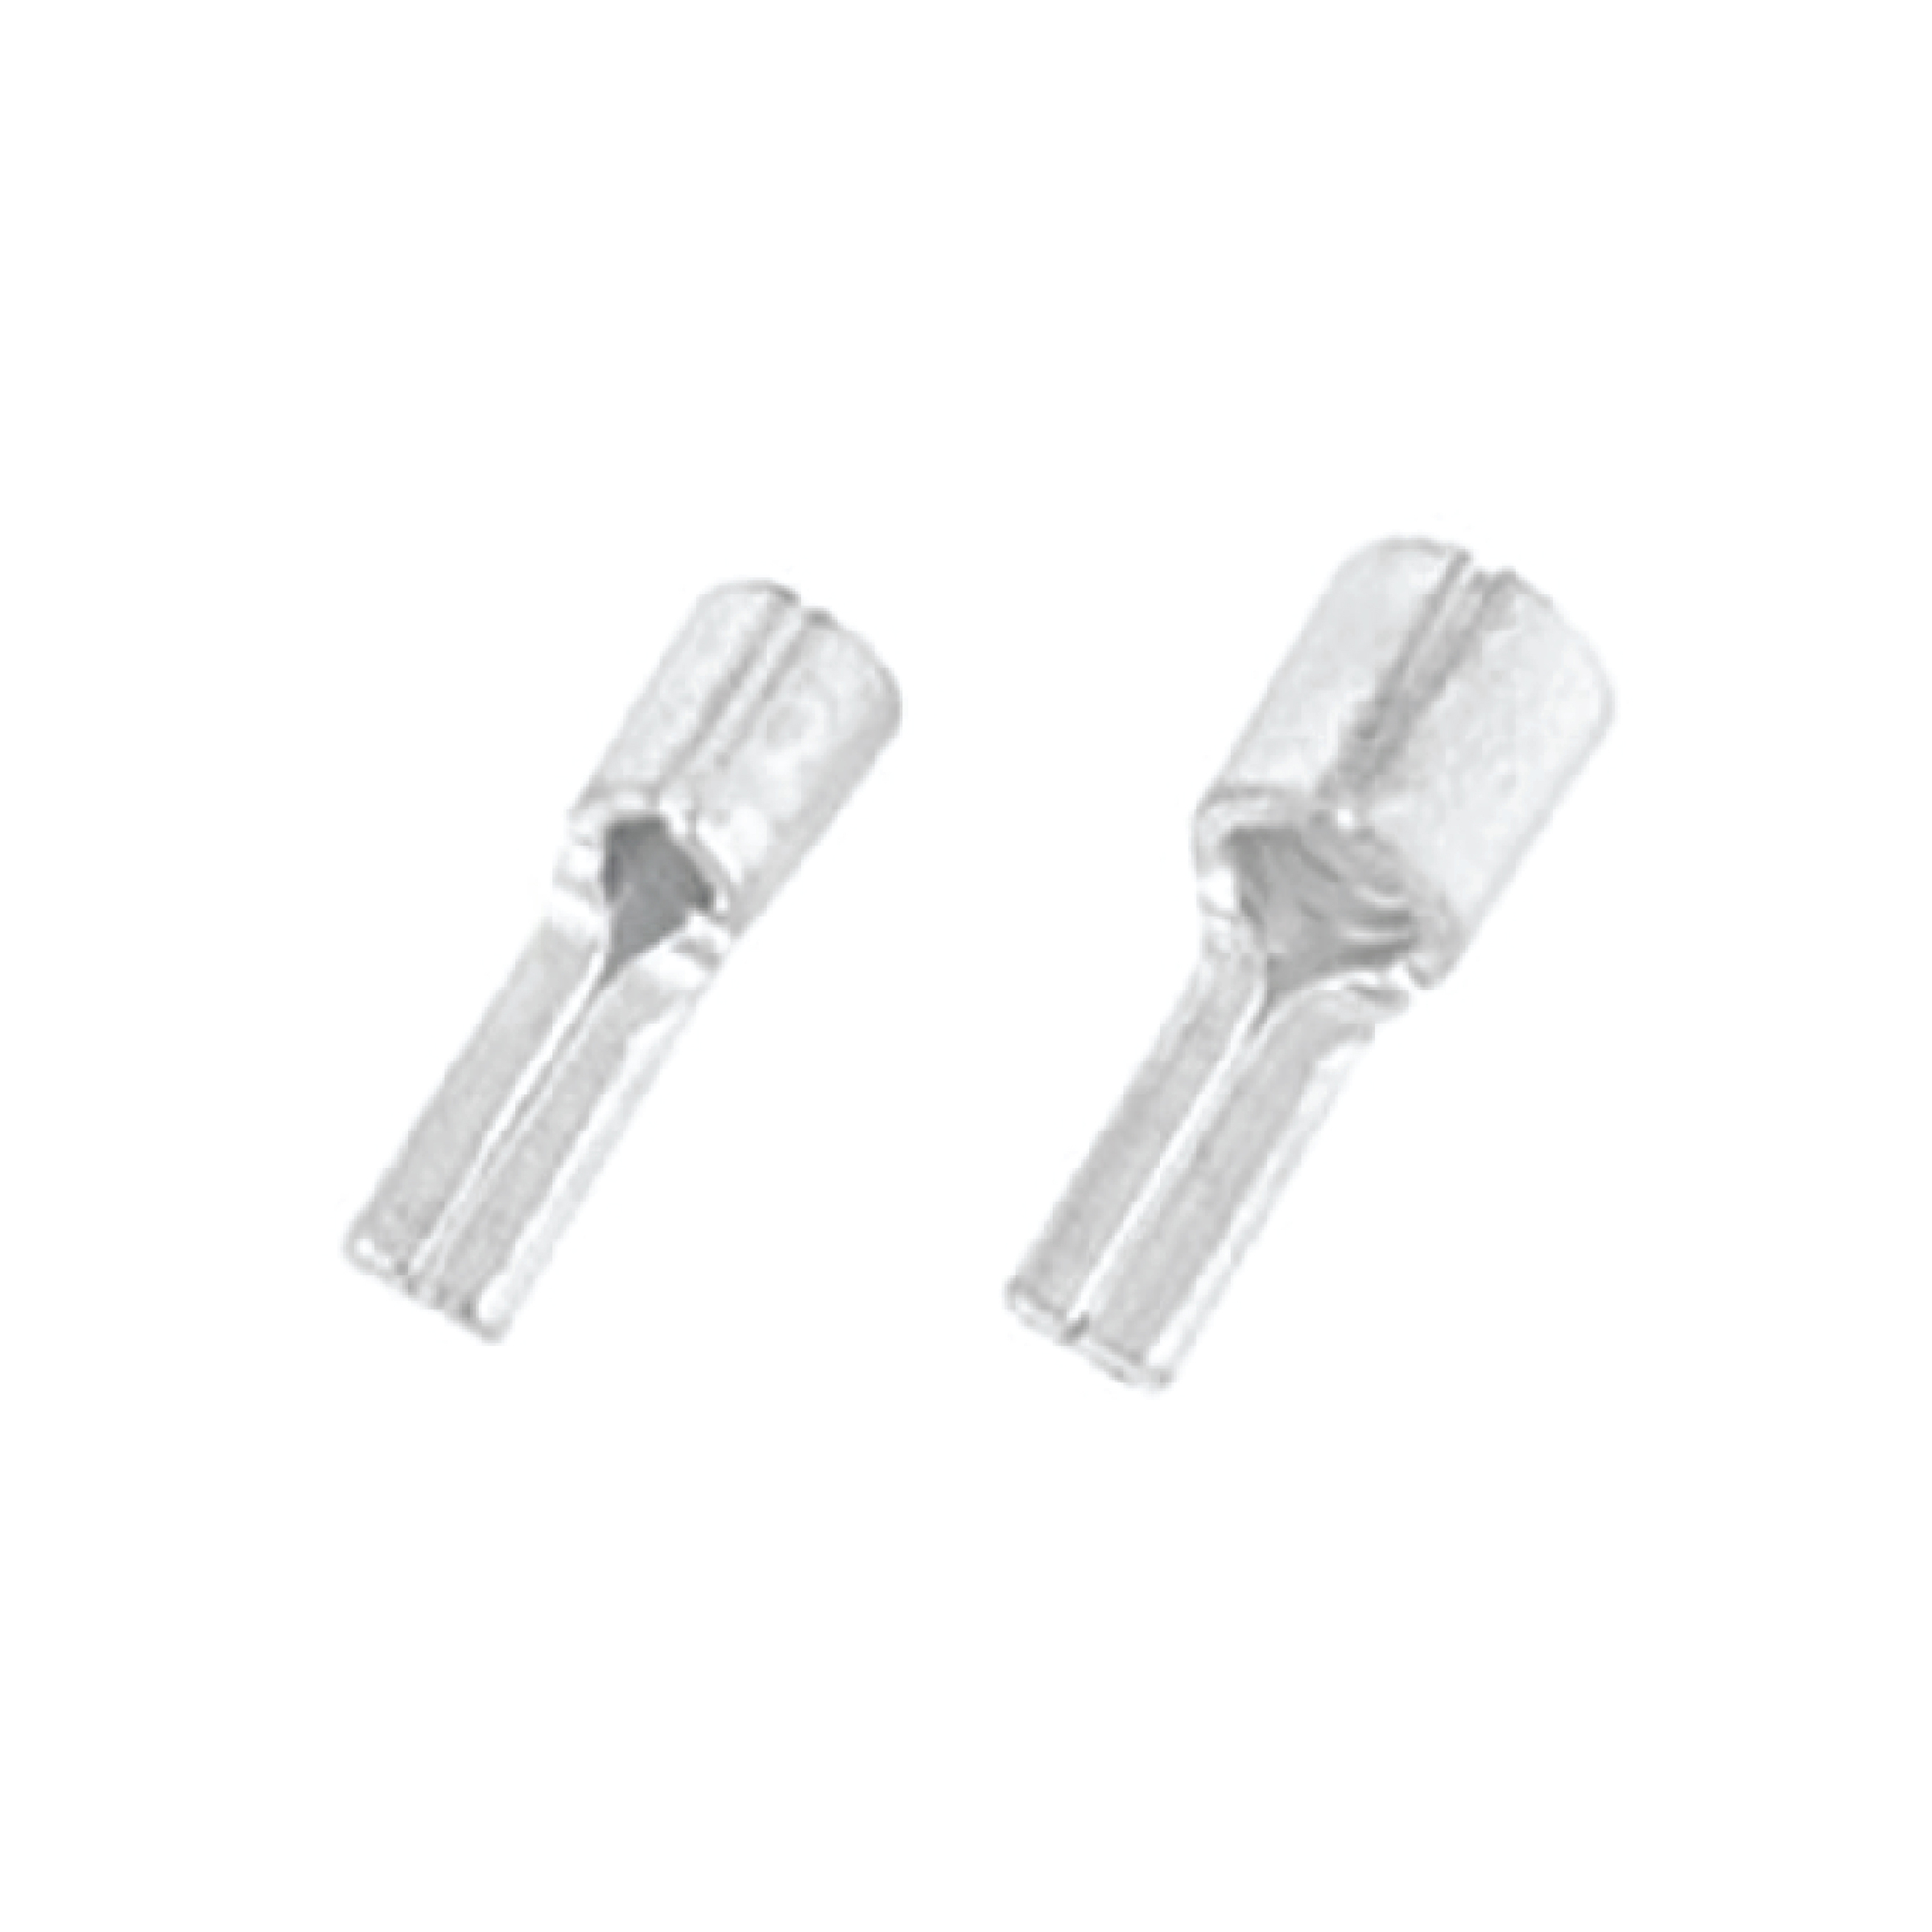 Installation & Accessories_Cable Lug Pin Terminal.jpg